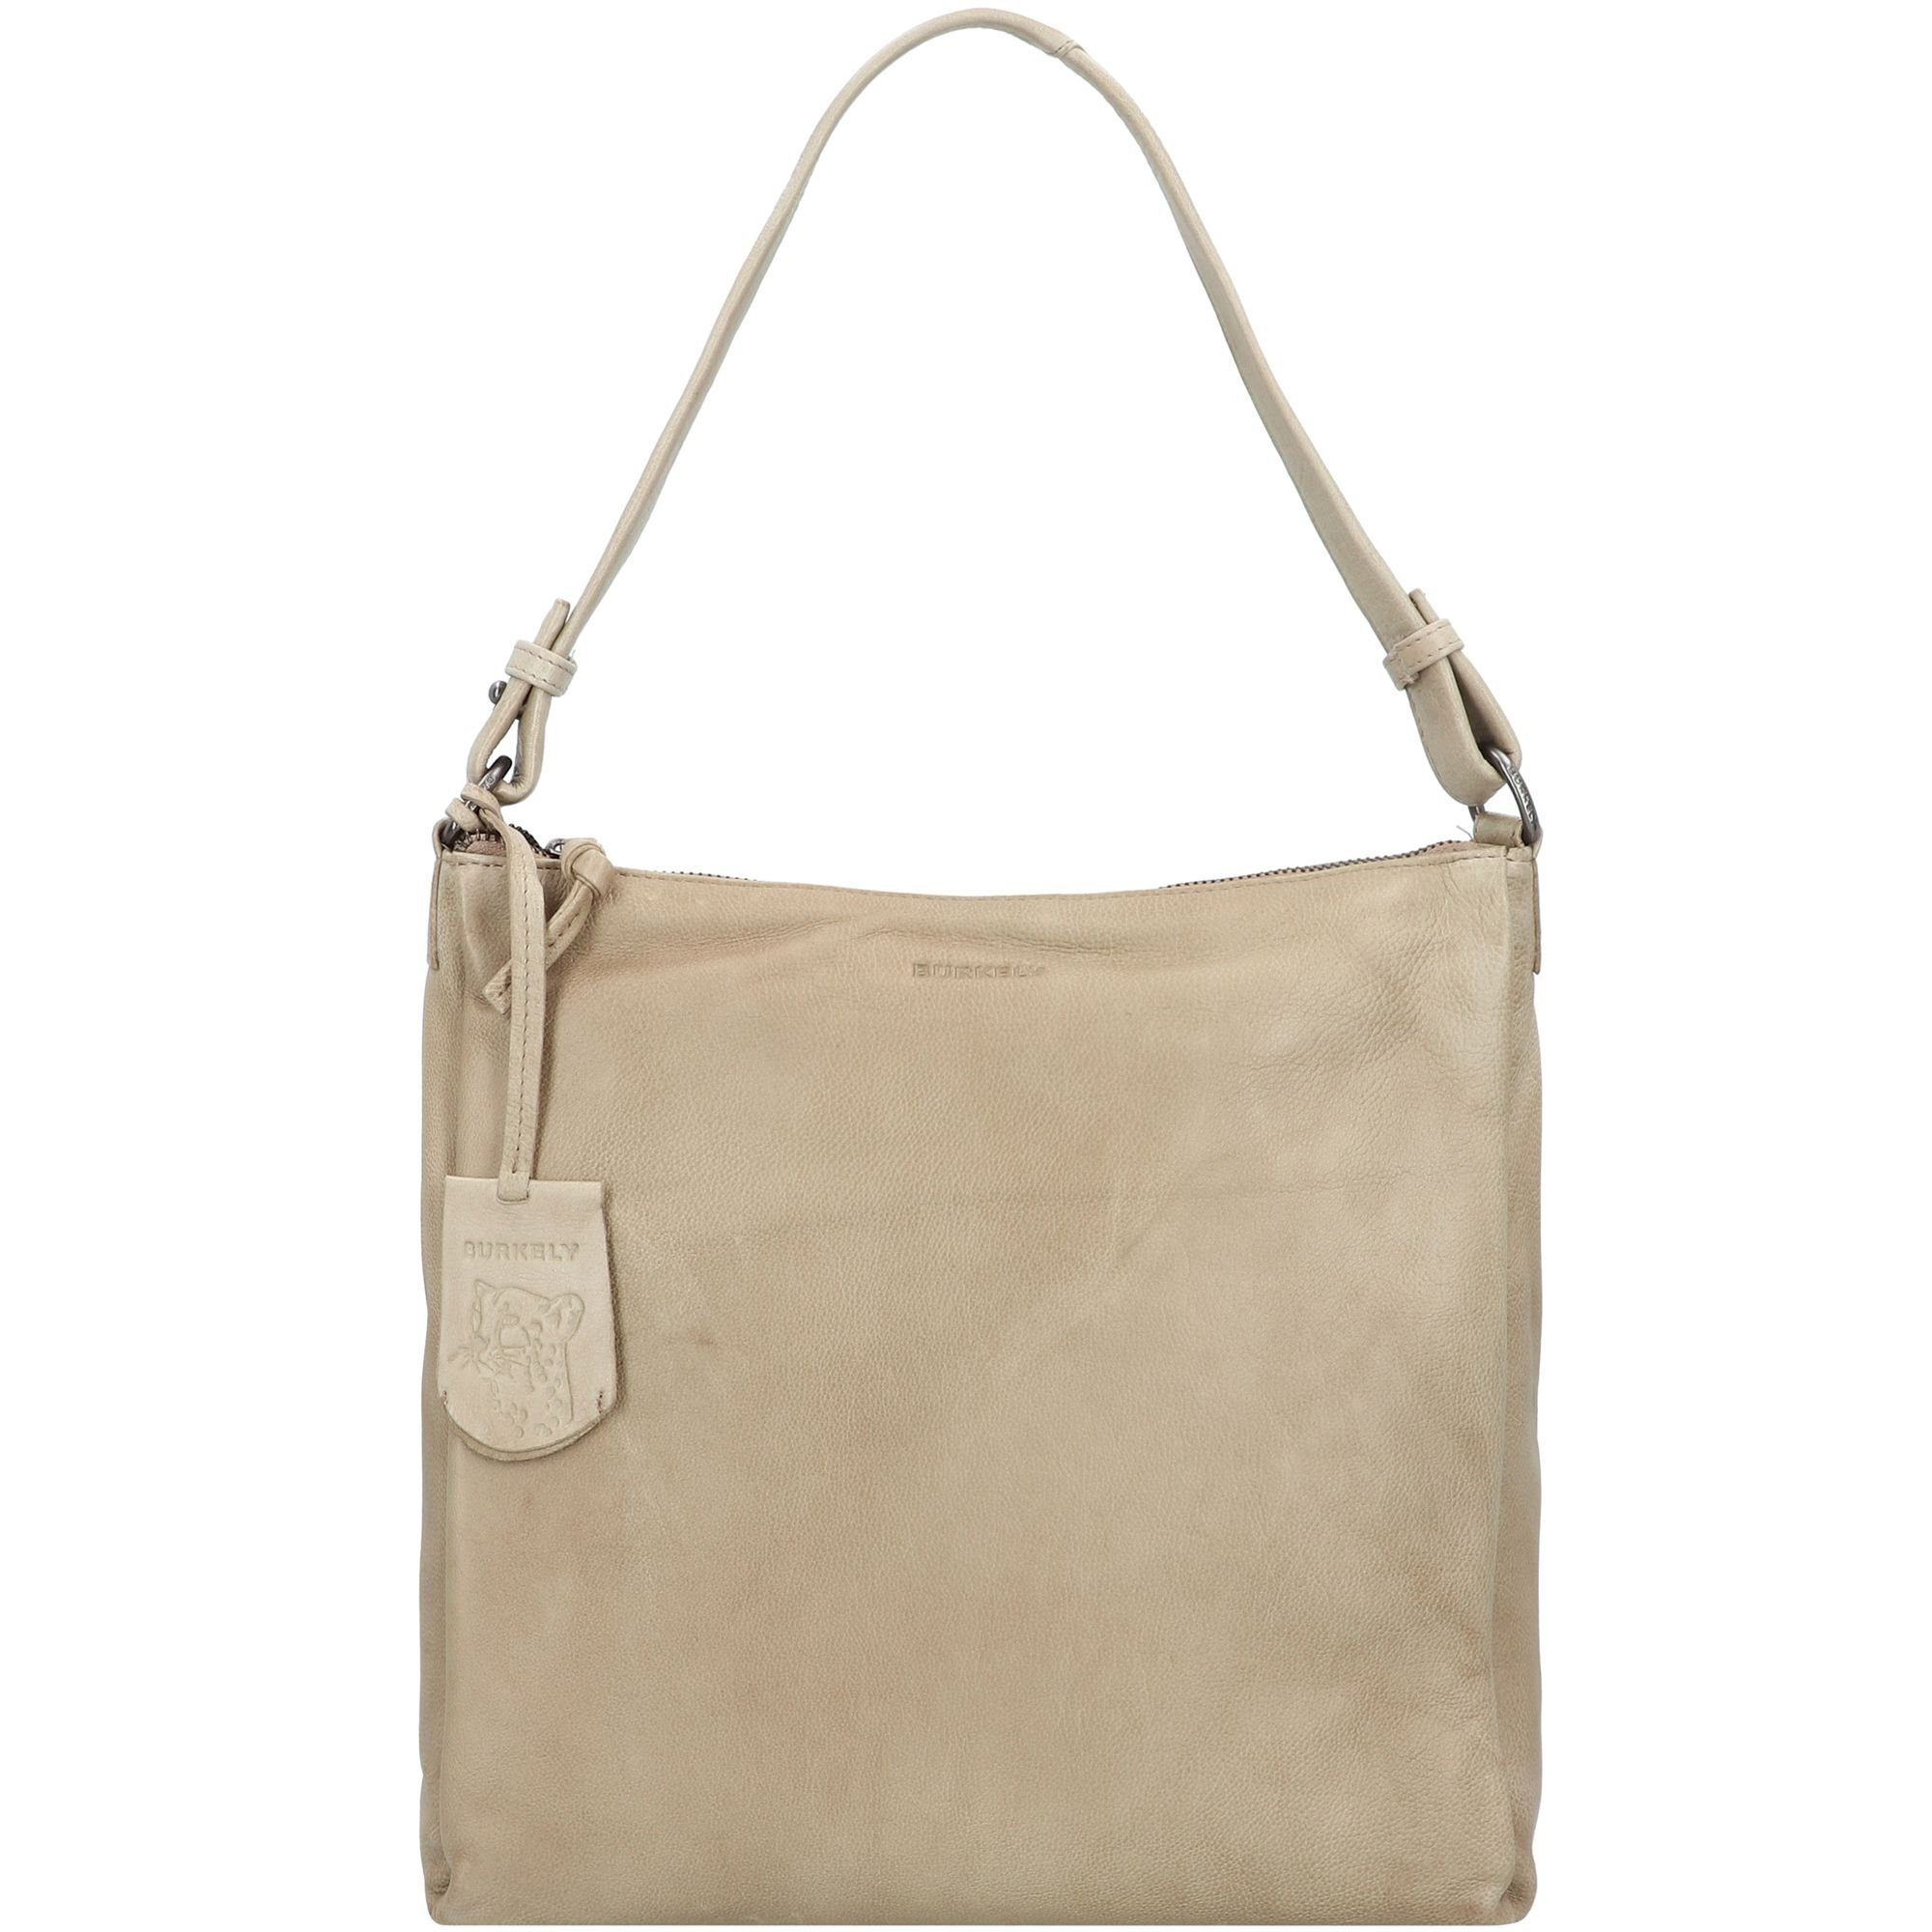 Leder Schultertasche Jolie, taupe Just Burkely truffle